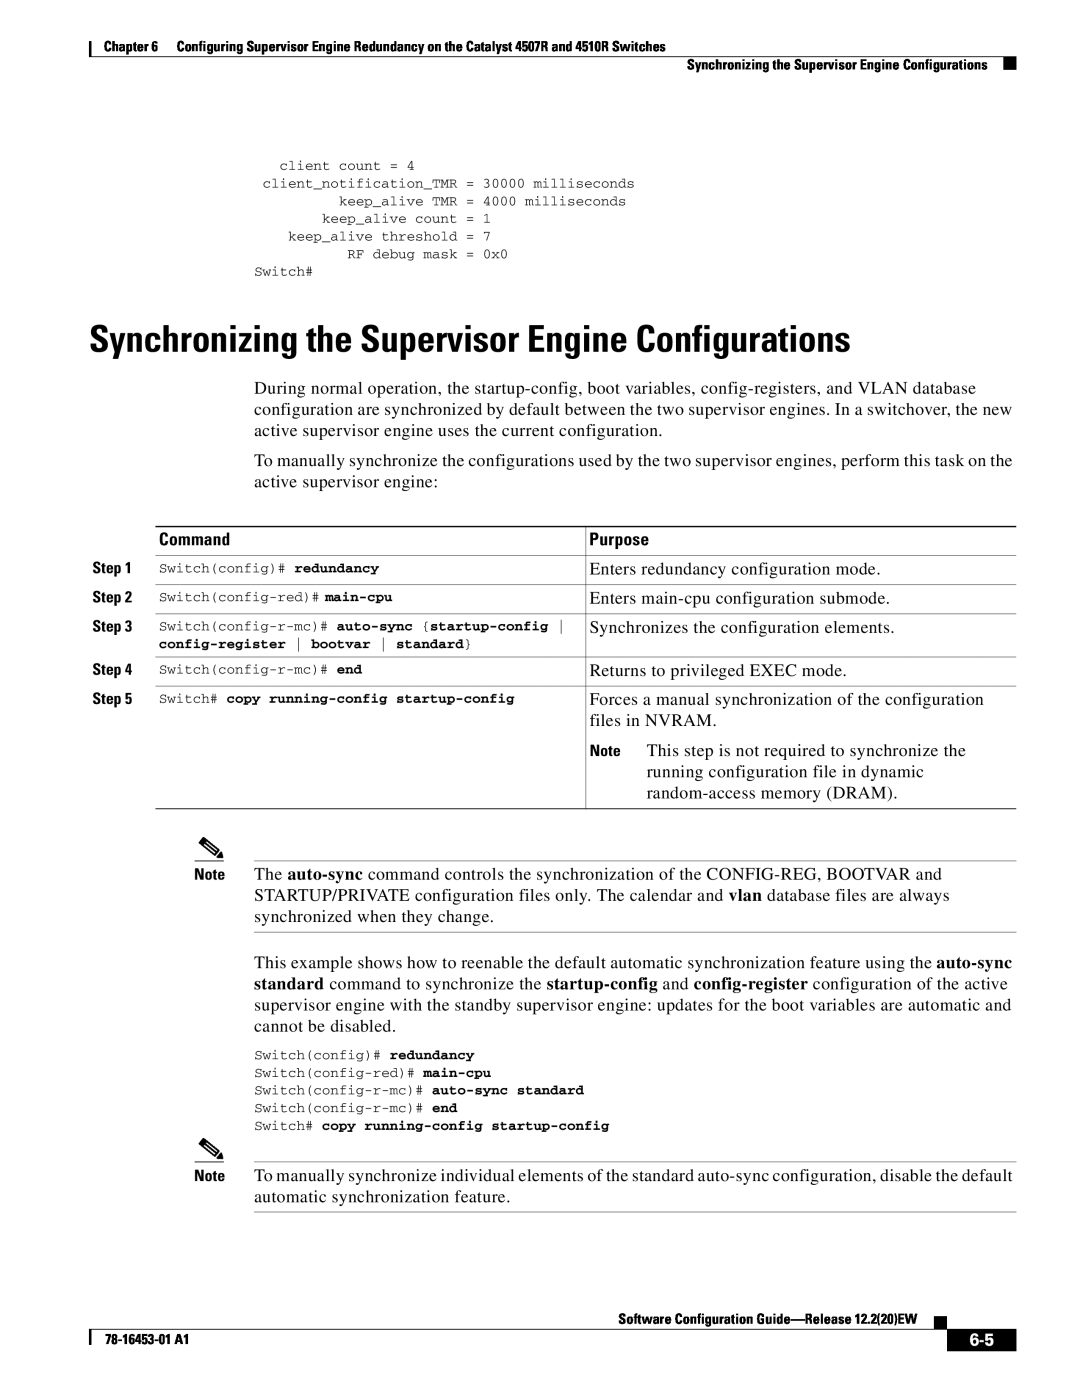 Cisco Systems WSC4507RE96V manual Synchronizing the Supervisor Engine Configurations, Command, Purpose 